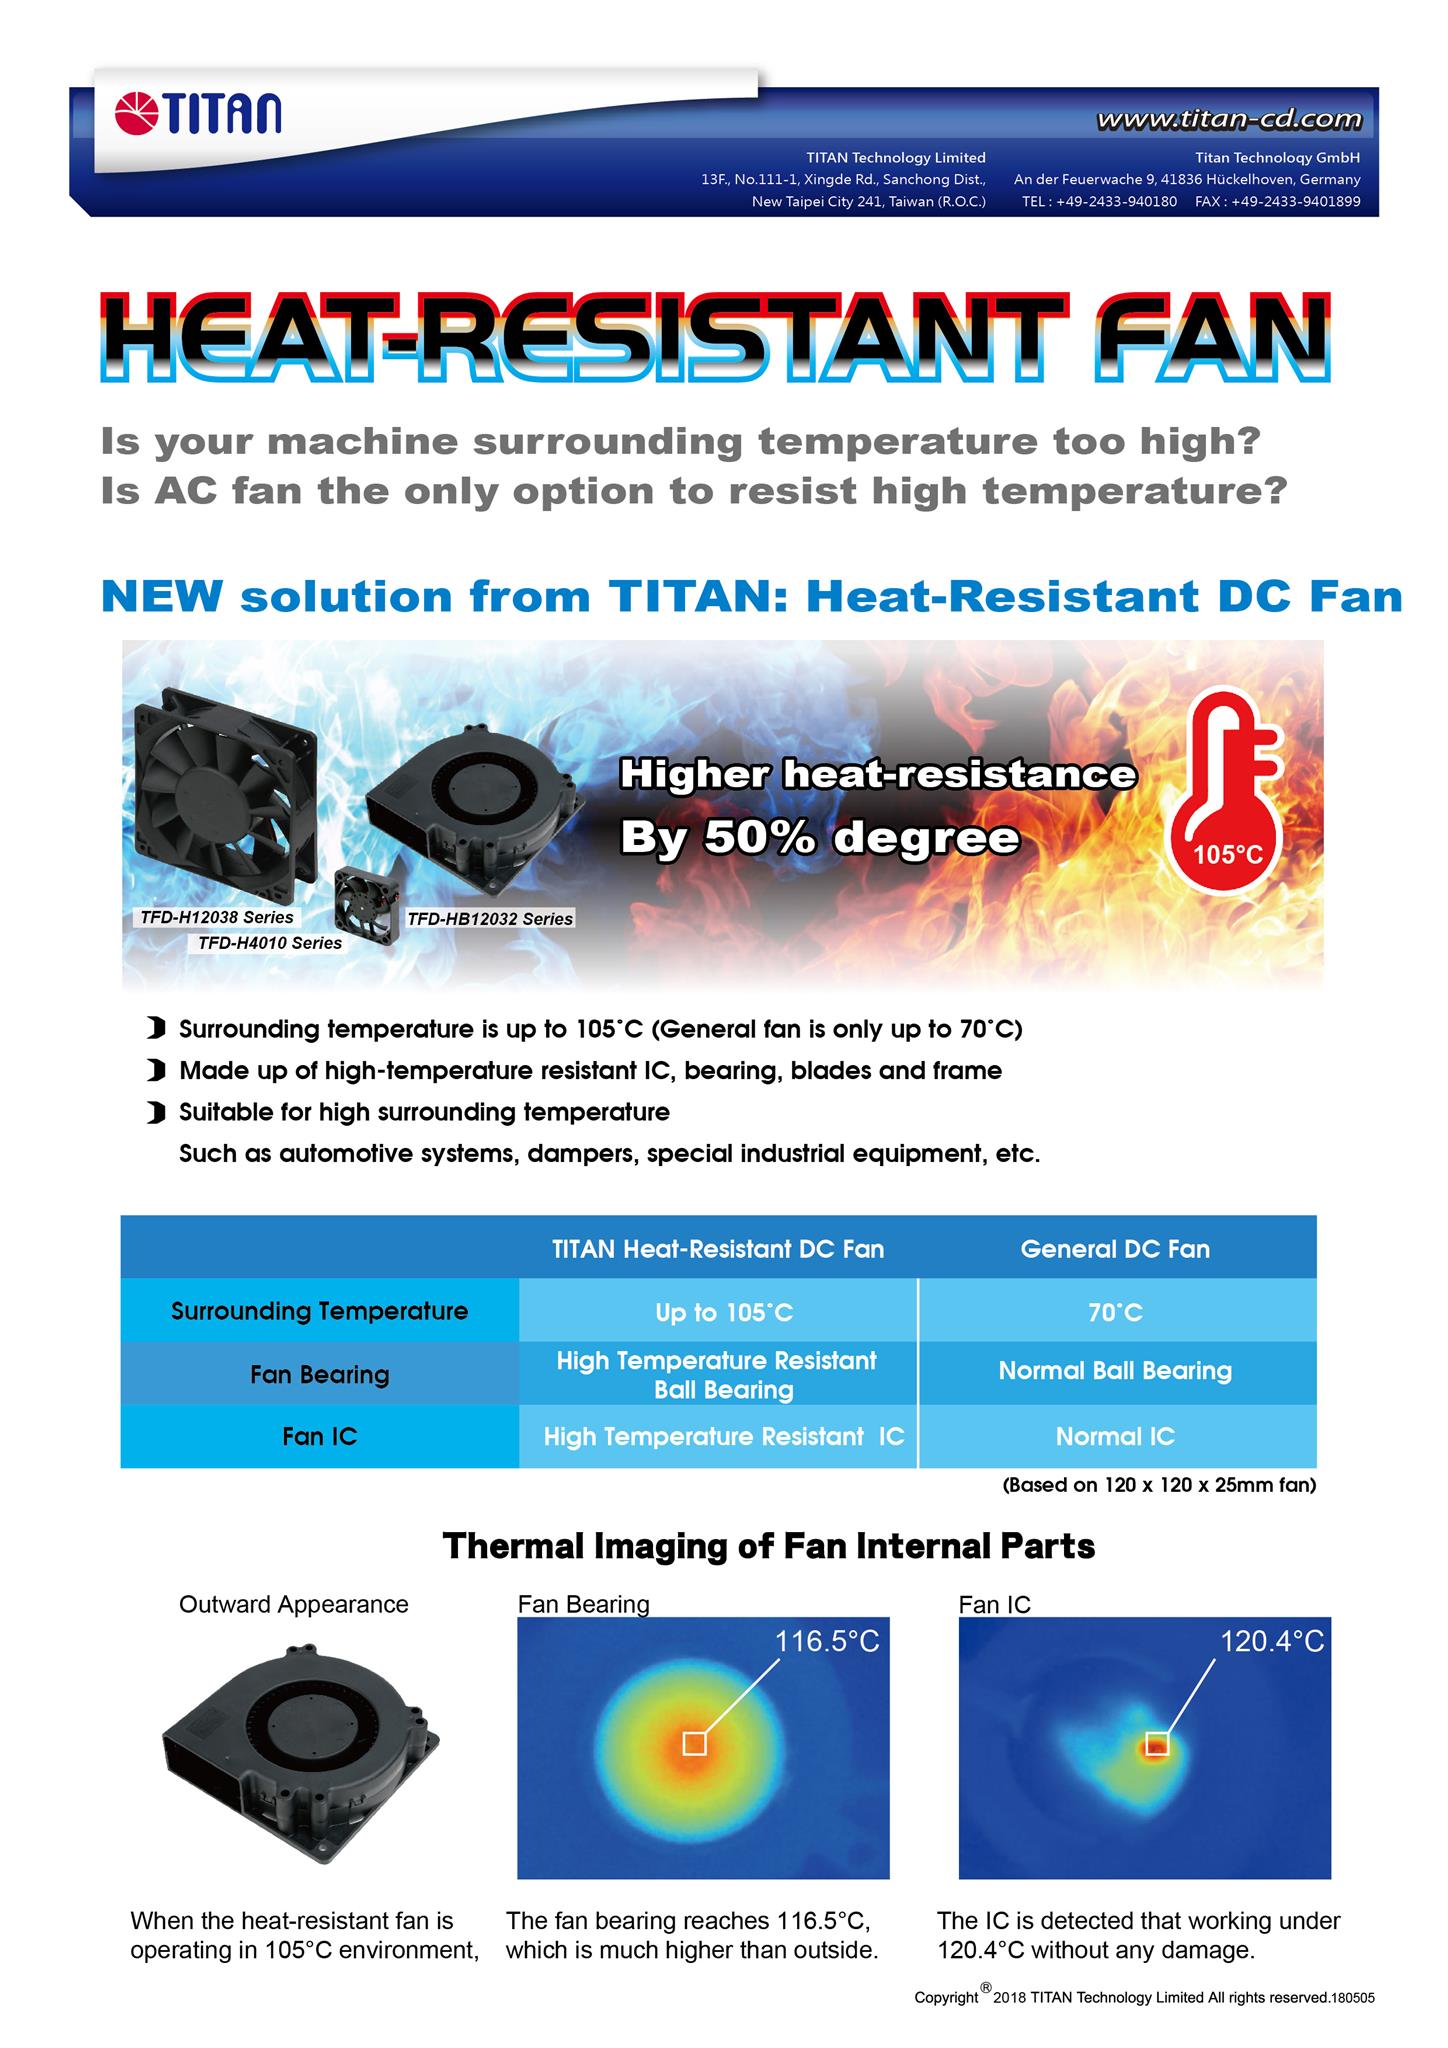 TITAN low profile CPU cooler is only 23-30mm height. Suitable for low profile case or other HTPC case /></p></body>